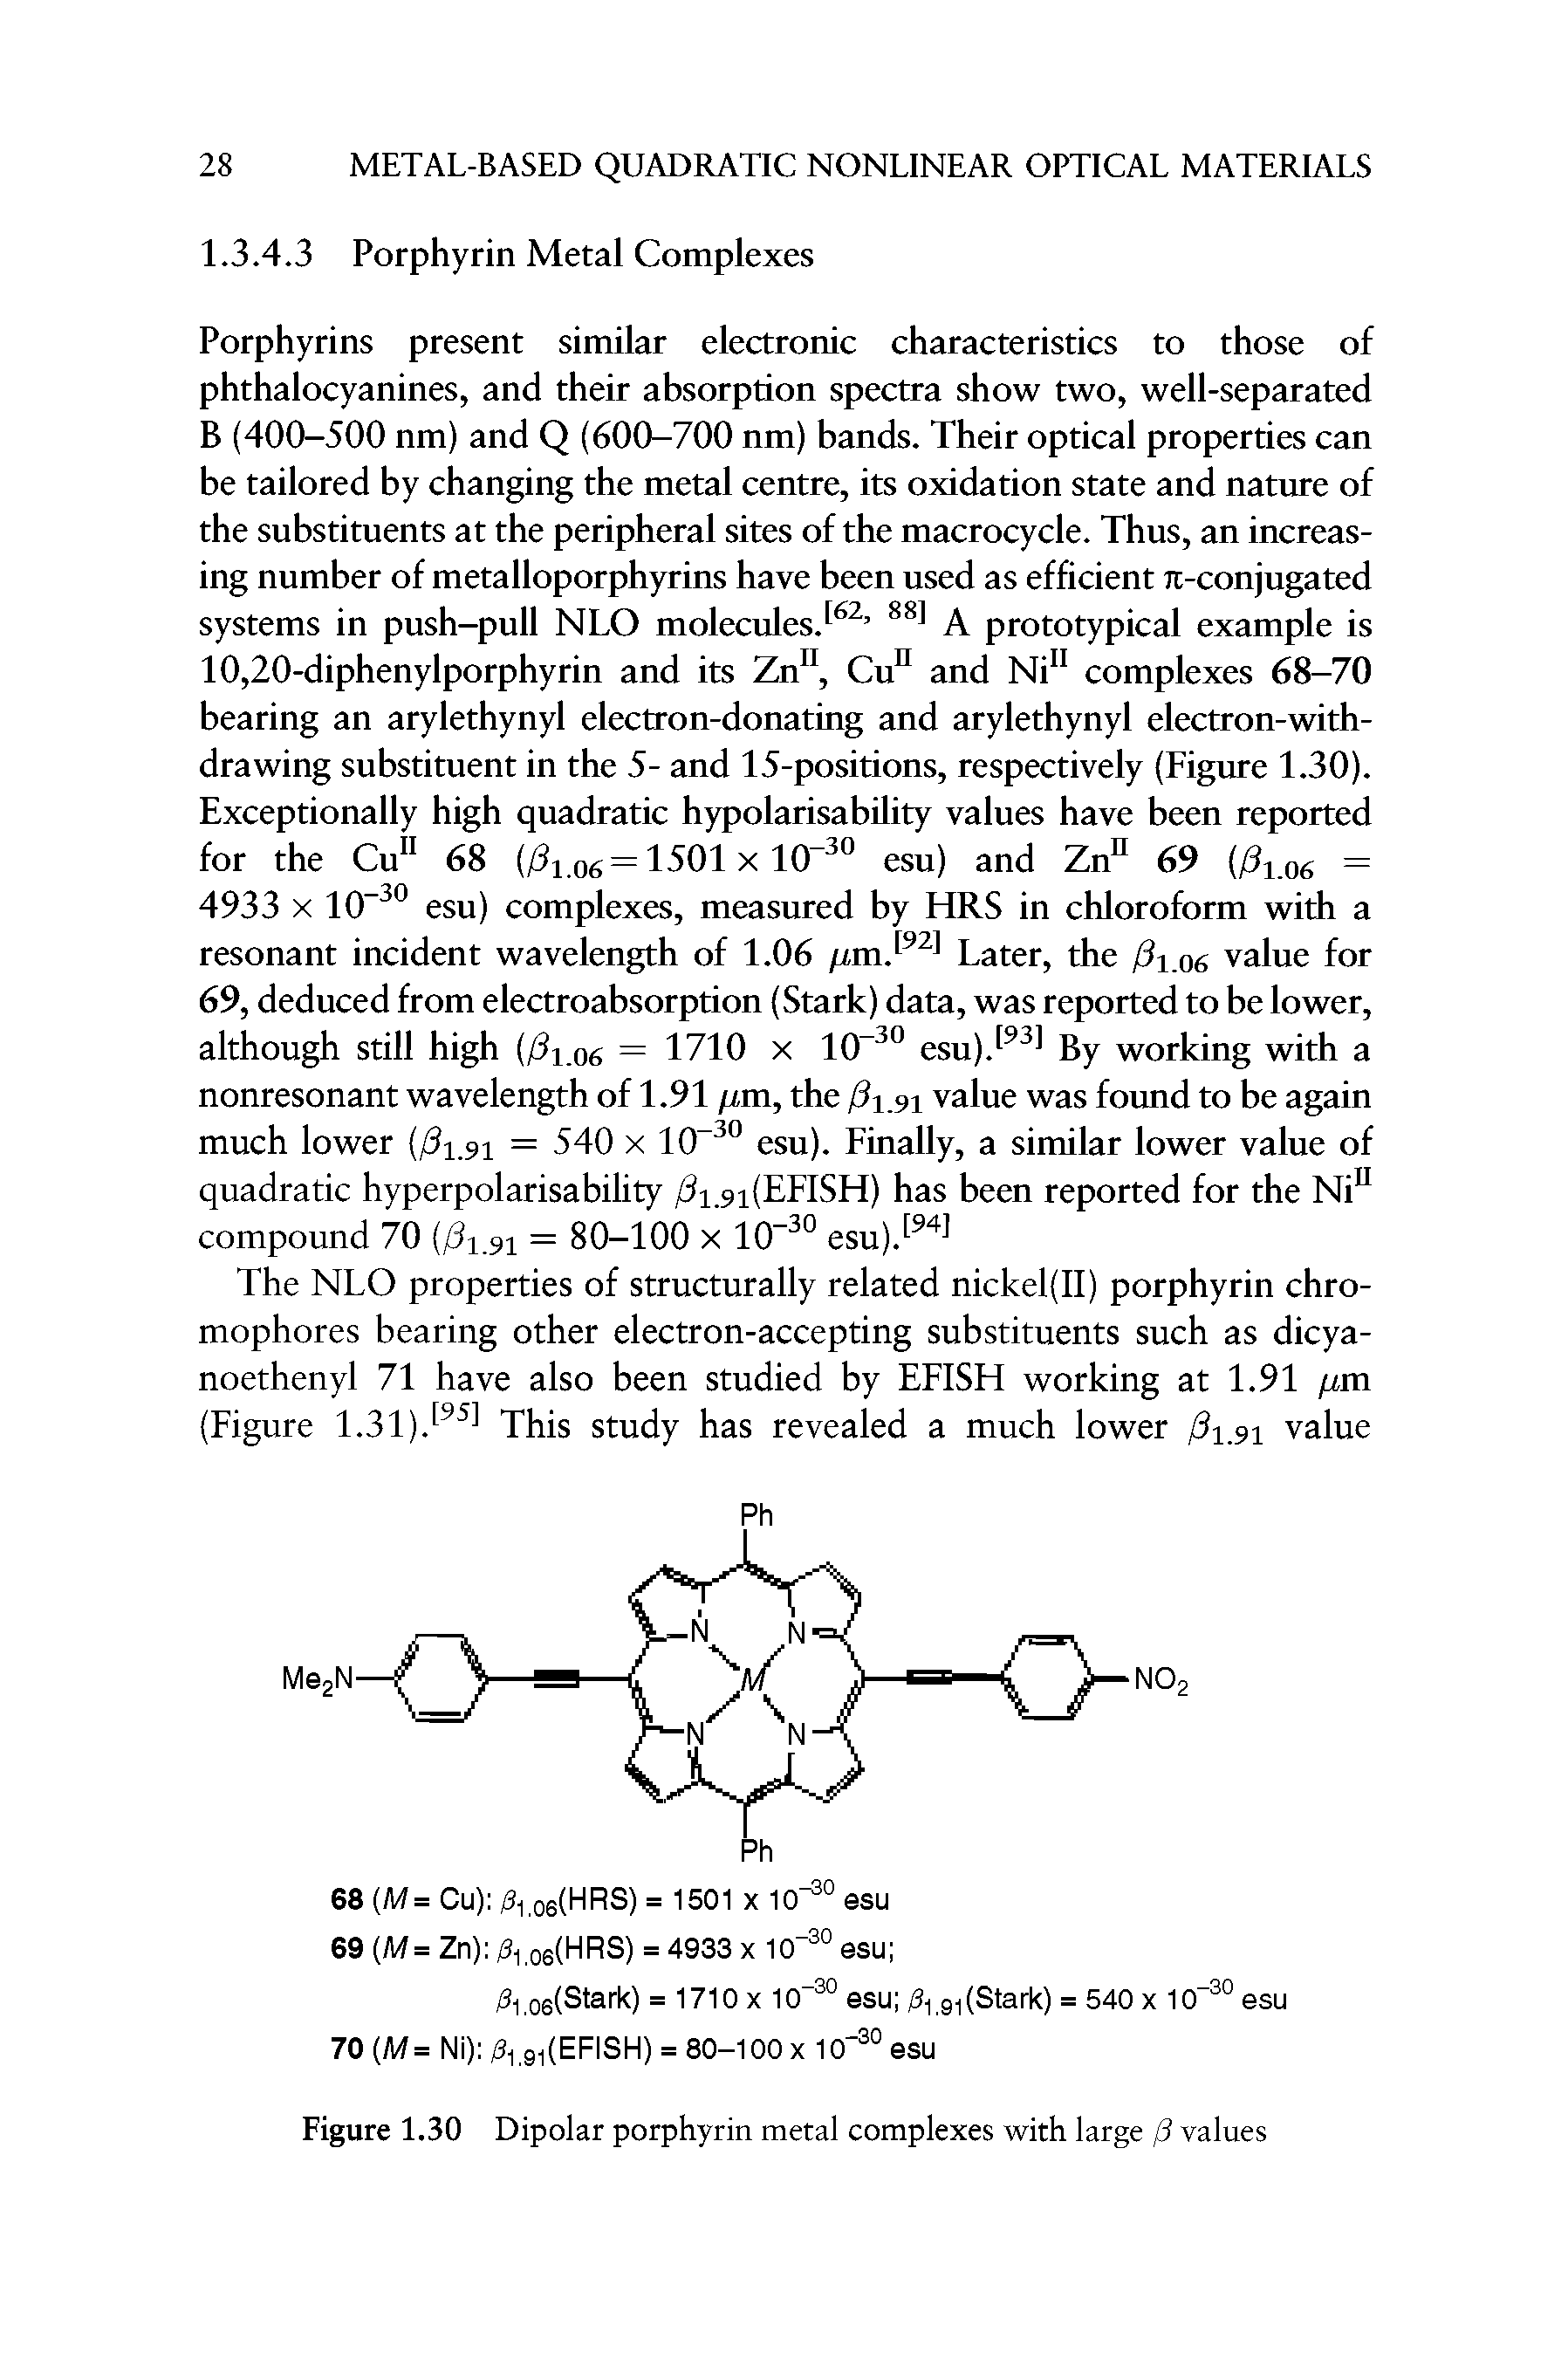 Figure 1.30 Dipolar porphyrin metal complexes with large /3 values...